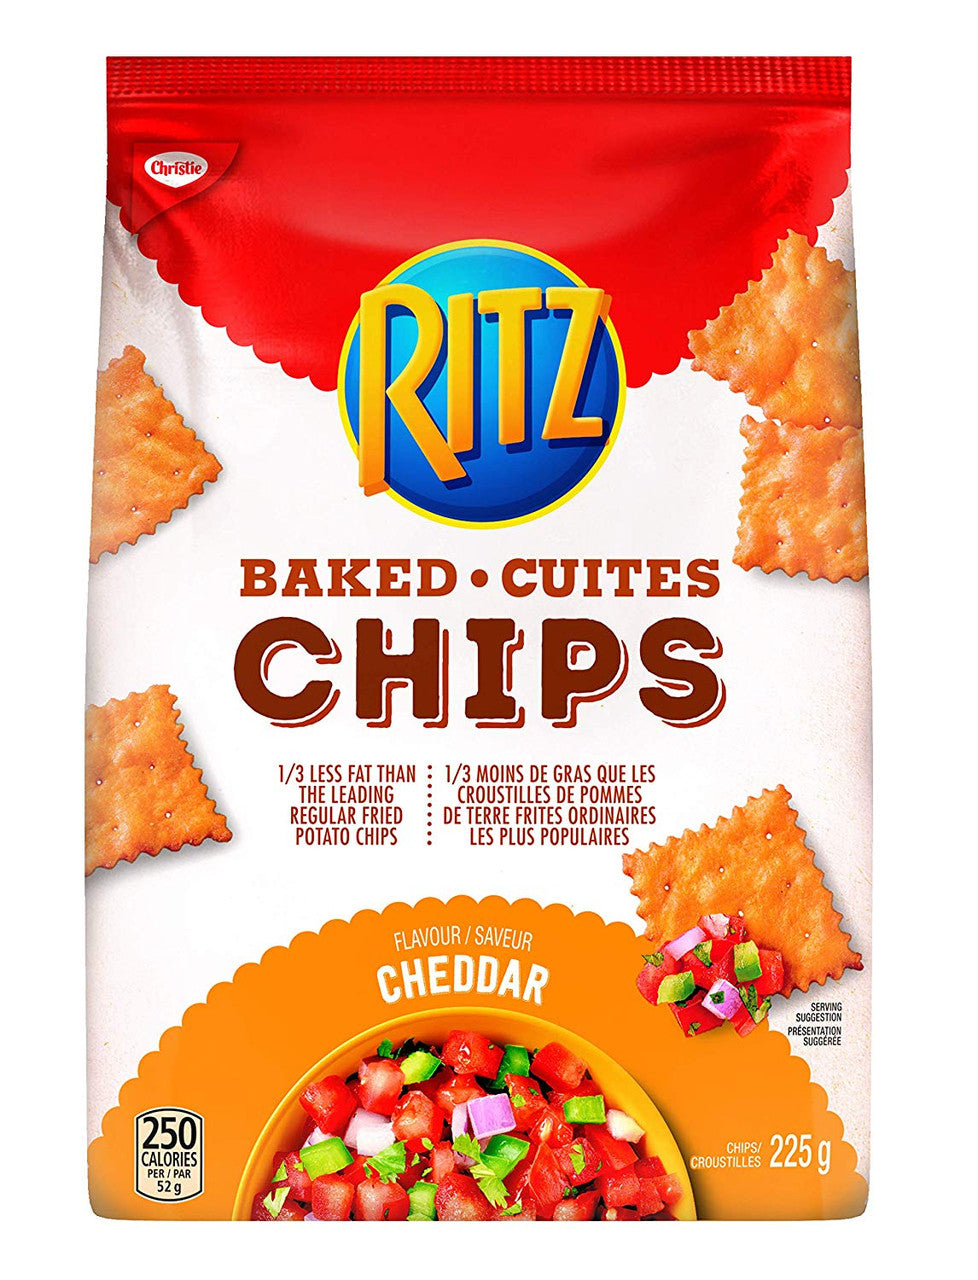 Ritz Baked Chips Cheddar Flavour, 225g/7.9oz, (Imported from Canada)